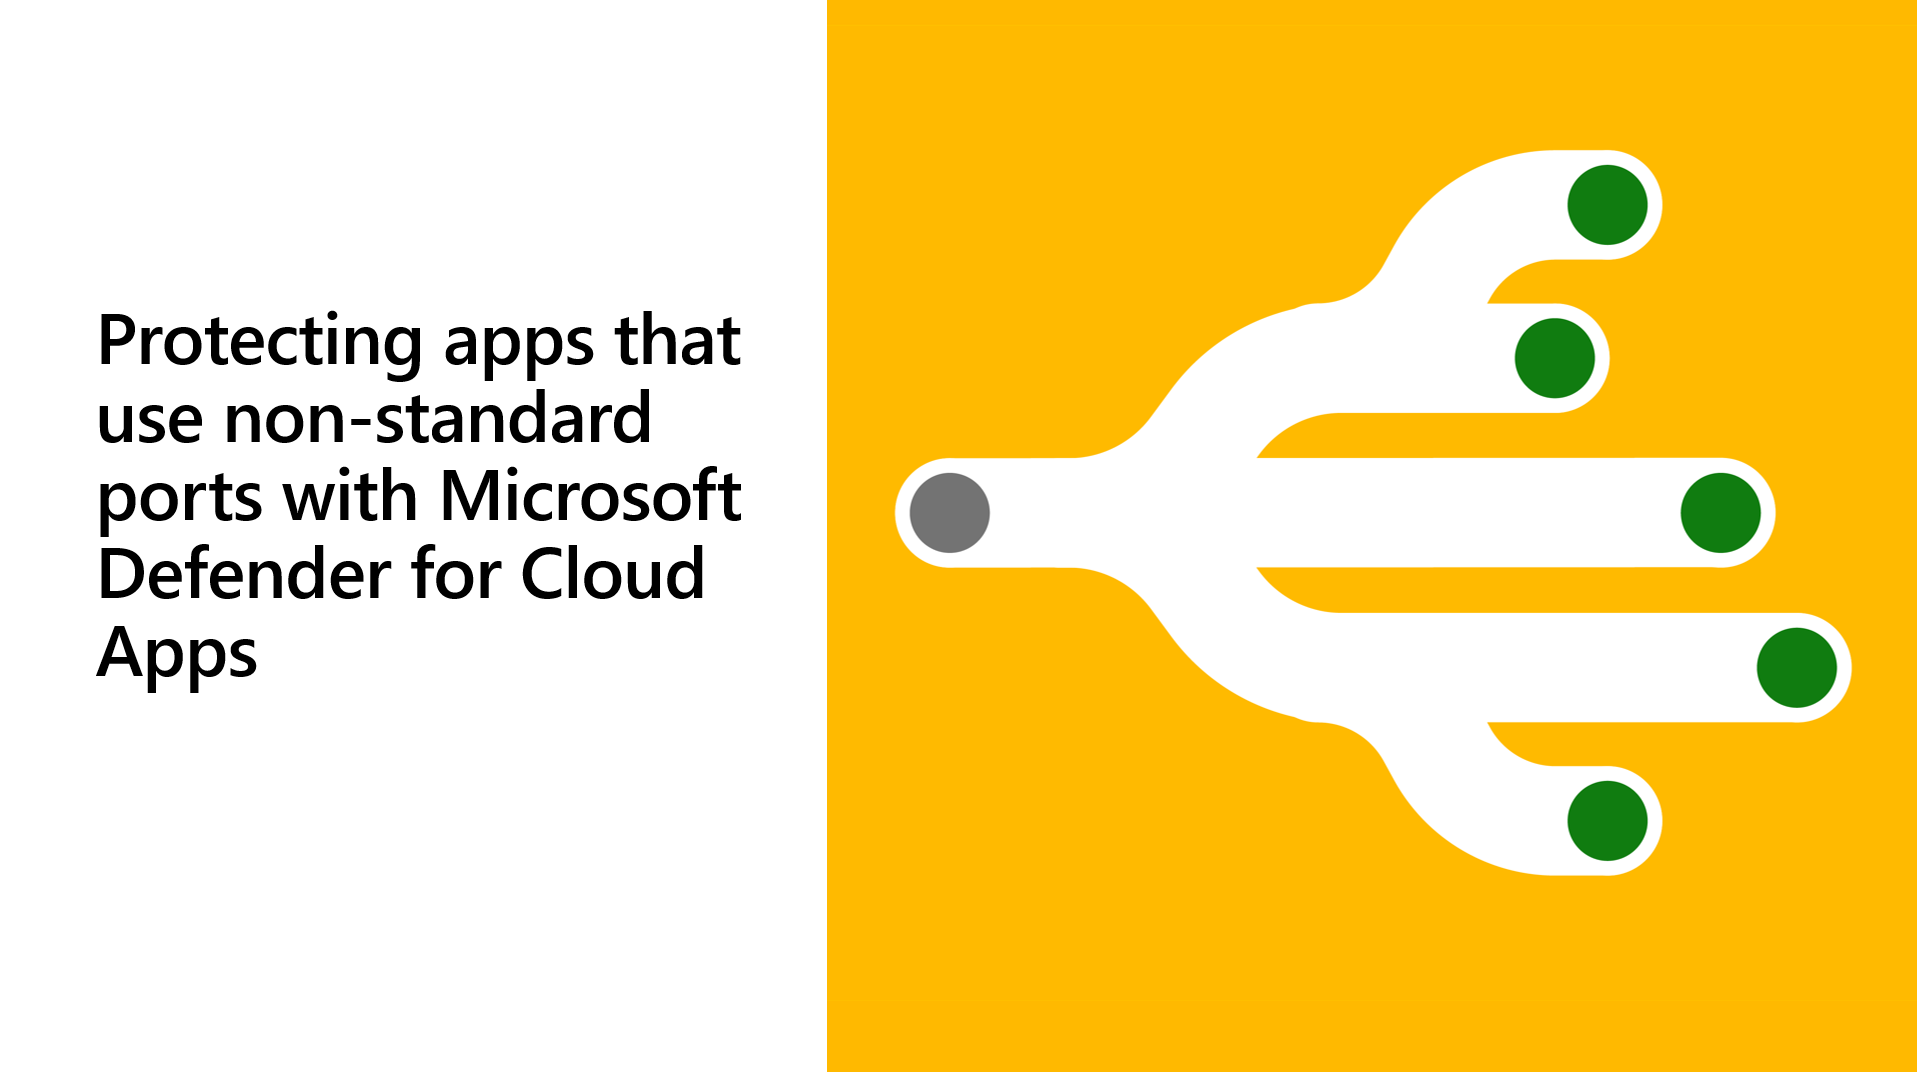 Protecting apps that use non-standard ports with Microsoft Defender for Cloud Apps